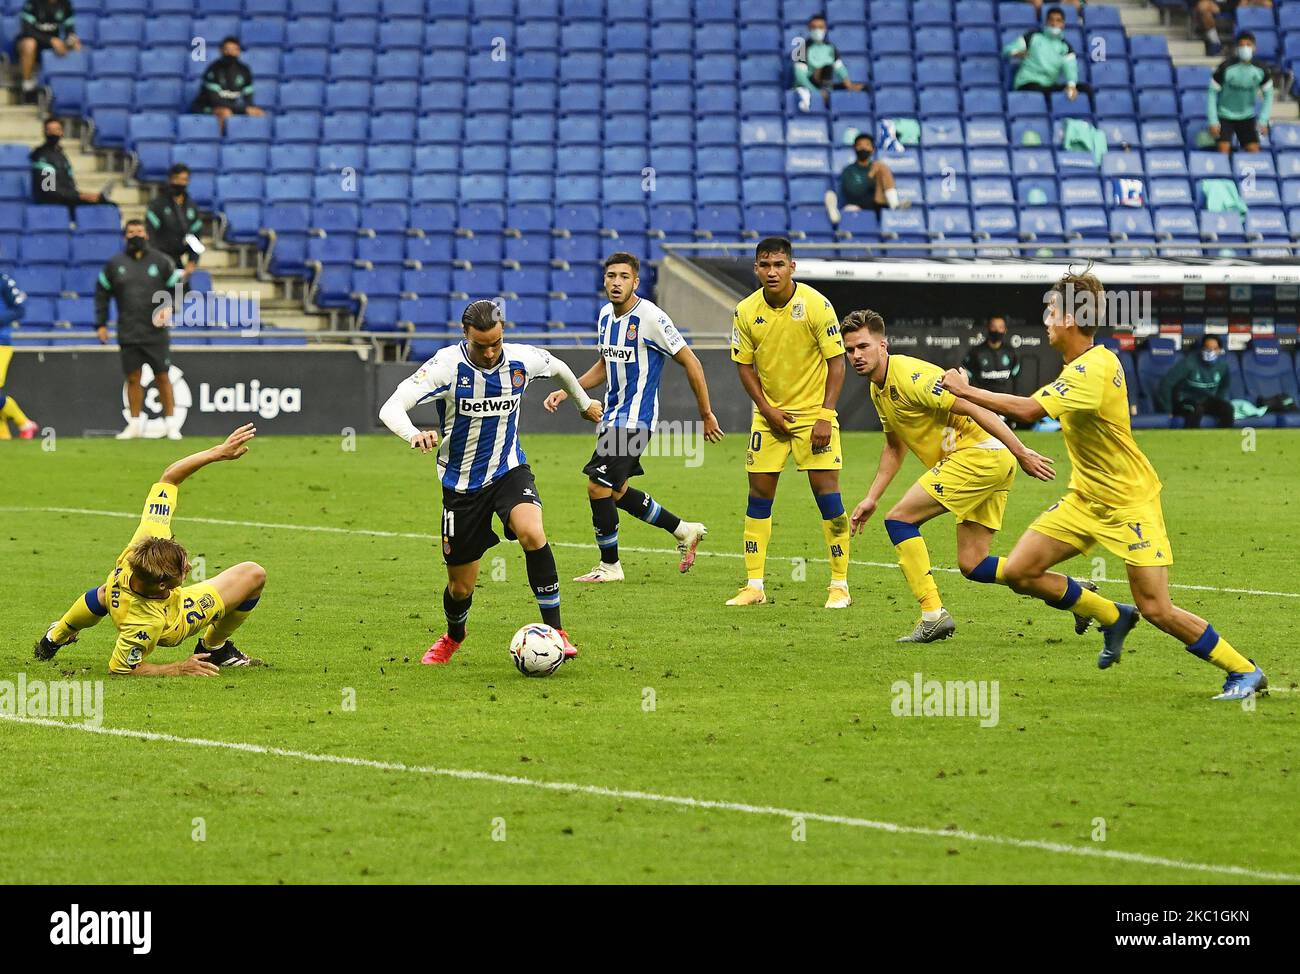 Raul De Tomas scores during the match between RCD Espanyol and A.D. Alcorcon, corresponding to the week 5 ofvthe Liga Smartbank, played at the RCDE Stadium, on 10th October 2020, in Barcelona, Spain. (Photo by Urbanandsport/NurPhoto) Stock Photo